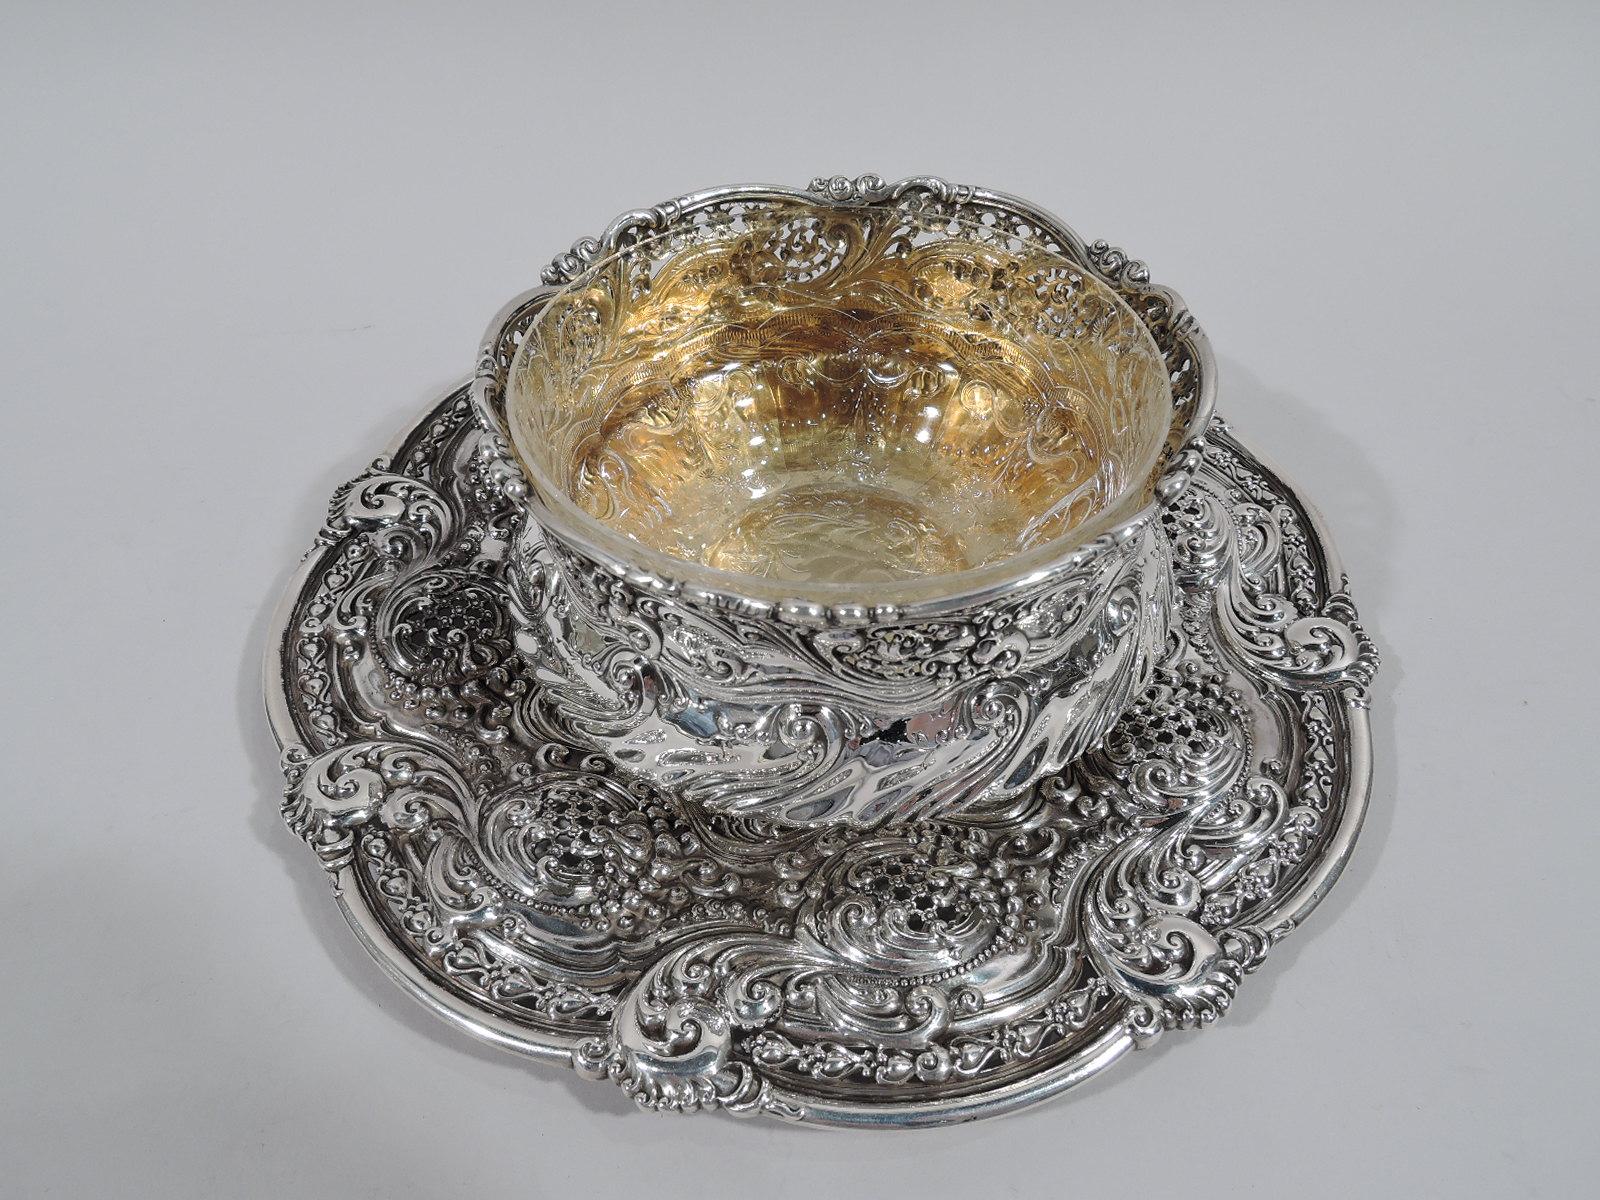 Sterling silver bowl on plate. Made by Tiffany & Co. in New York. Bowl: Squat with wavy and flared rim and short scrolled foot with bracket supports. Gilt interior. Plate: Round with scalloped rim. Plain and deep wavy star well with chased scrolls